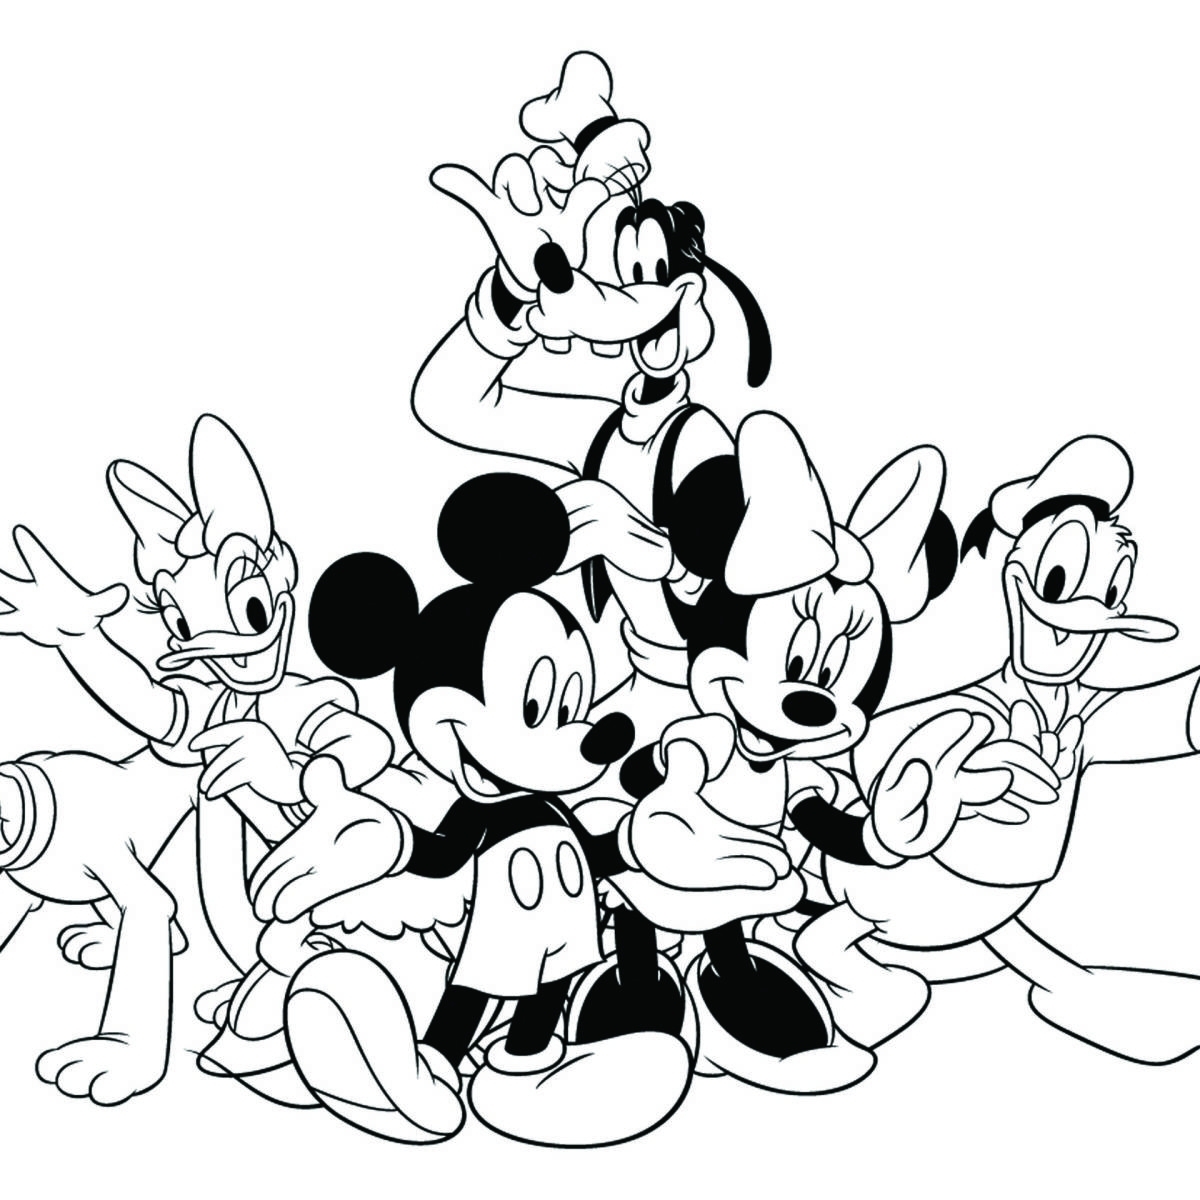 walt-disney-world-coloring-pages-at-getdrawings-free-download